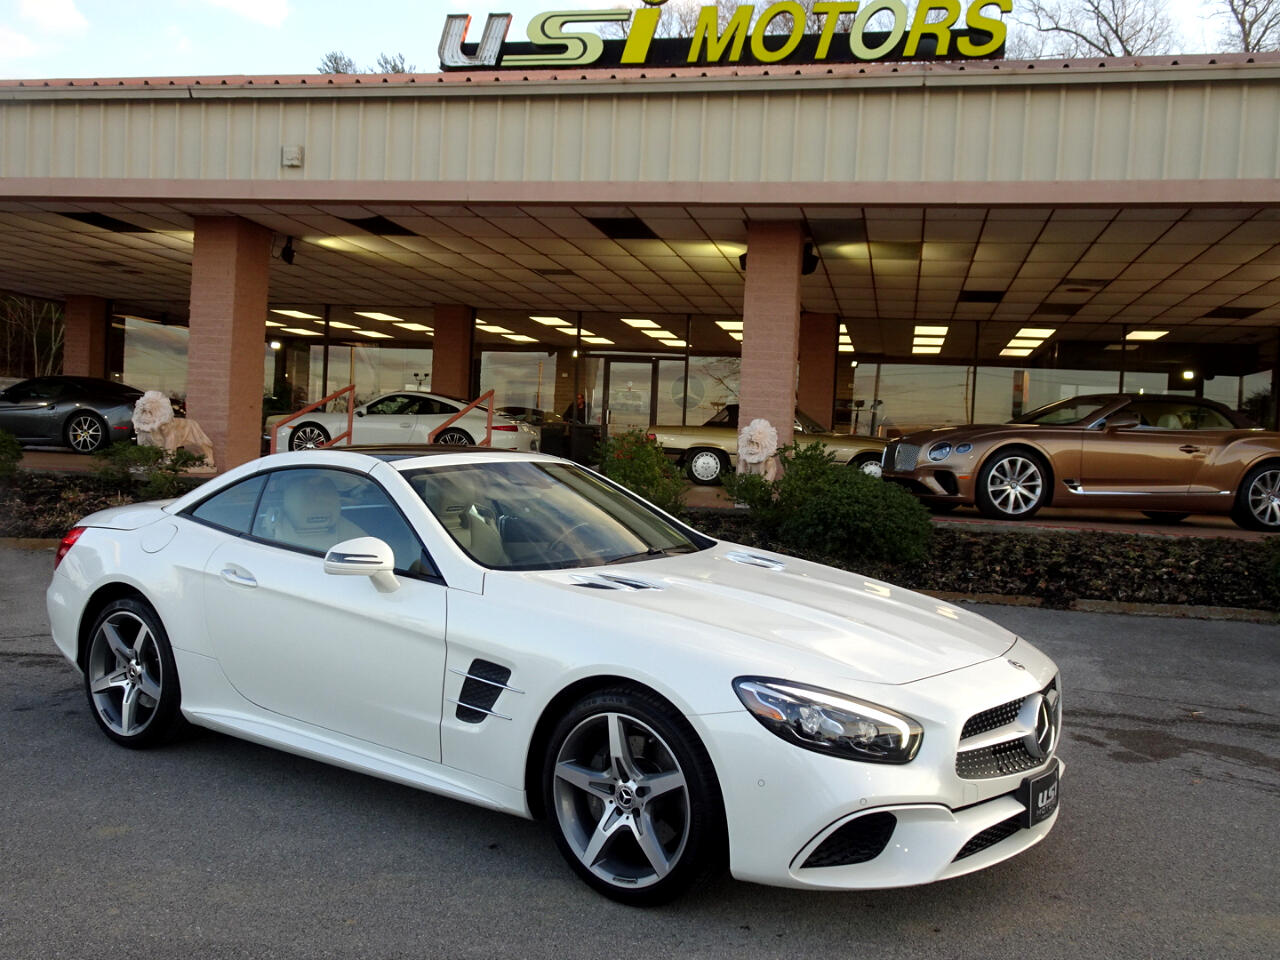 Used 2019 Mercedes-Benz SL-Class SL550 for Sale in Knoxville TN 37919 USI  Motors Inc.